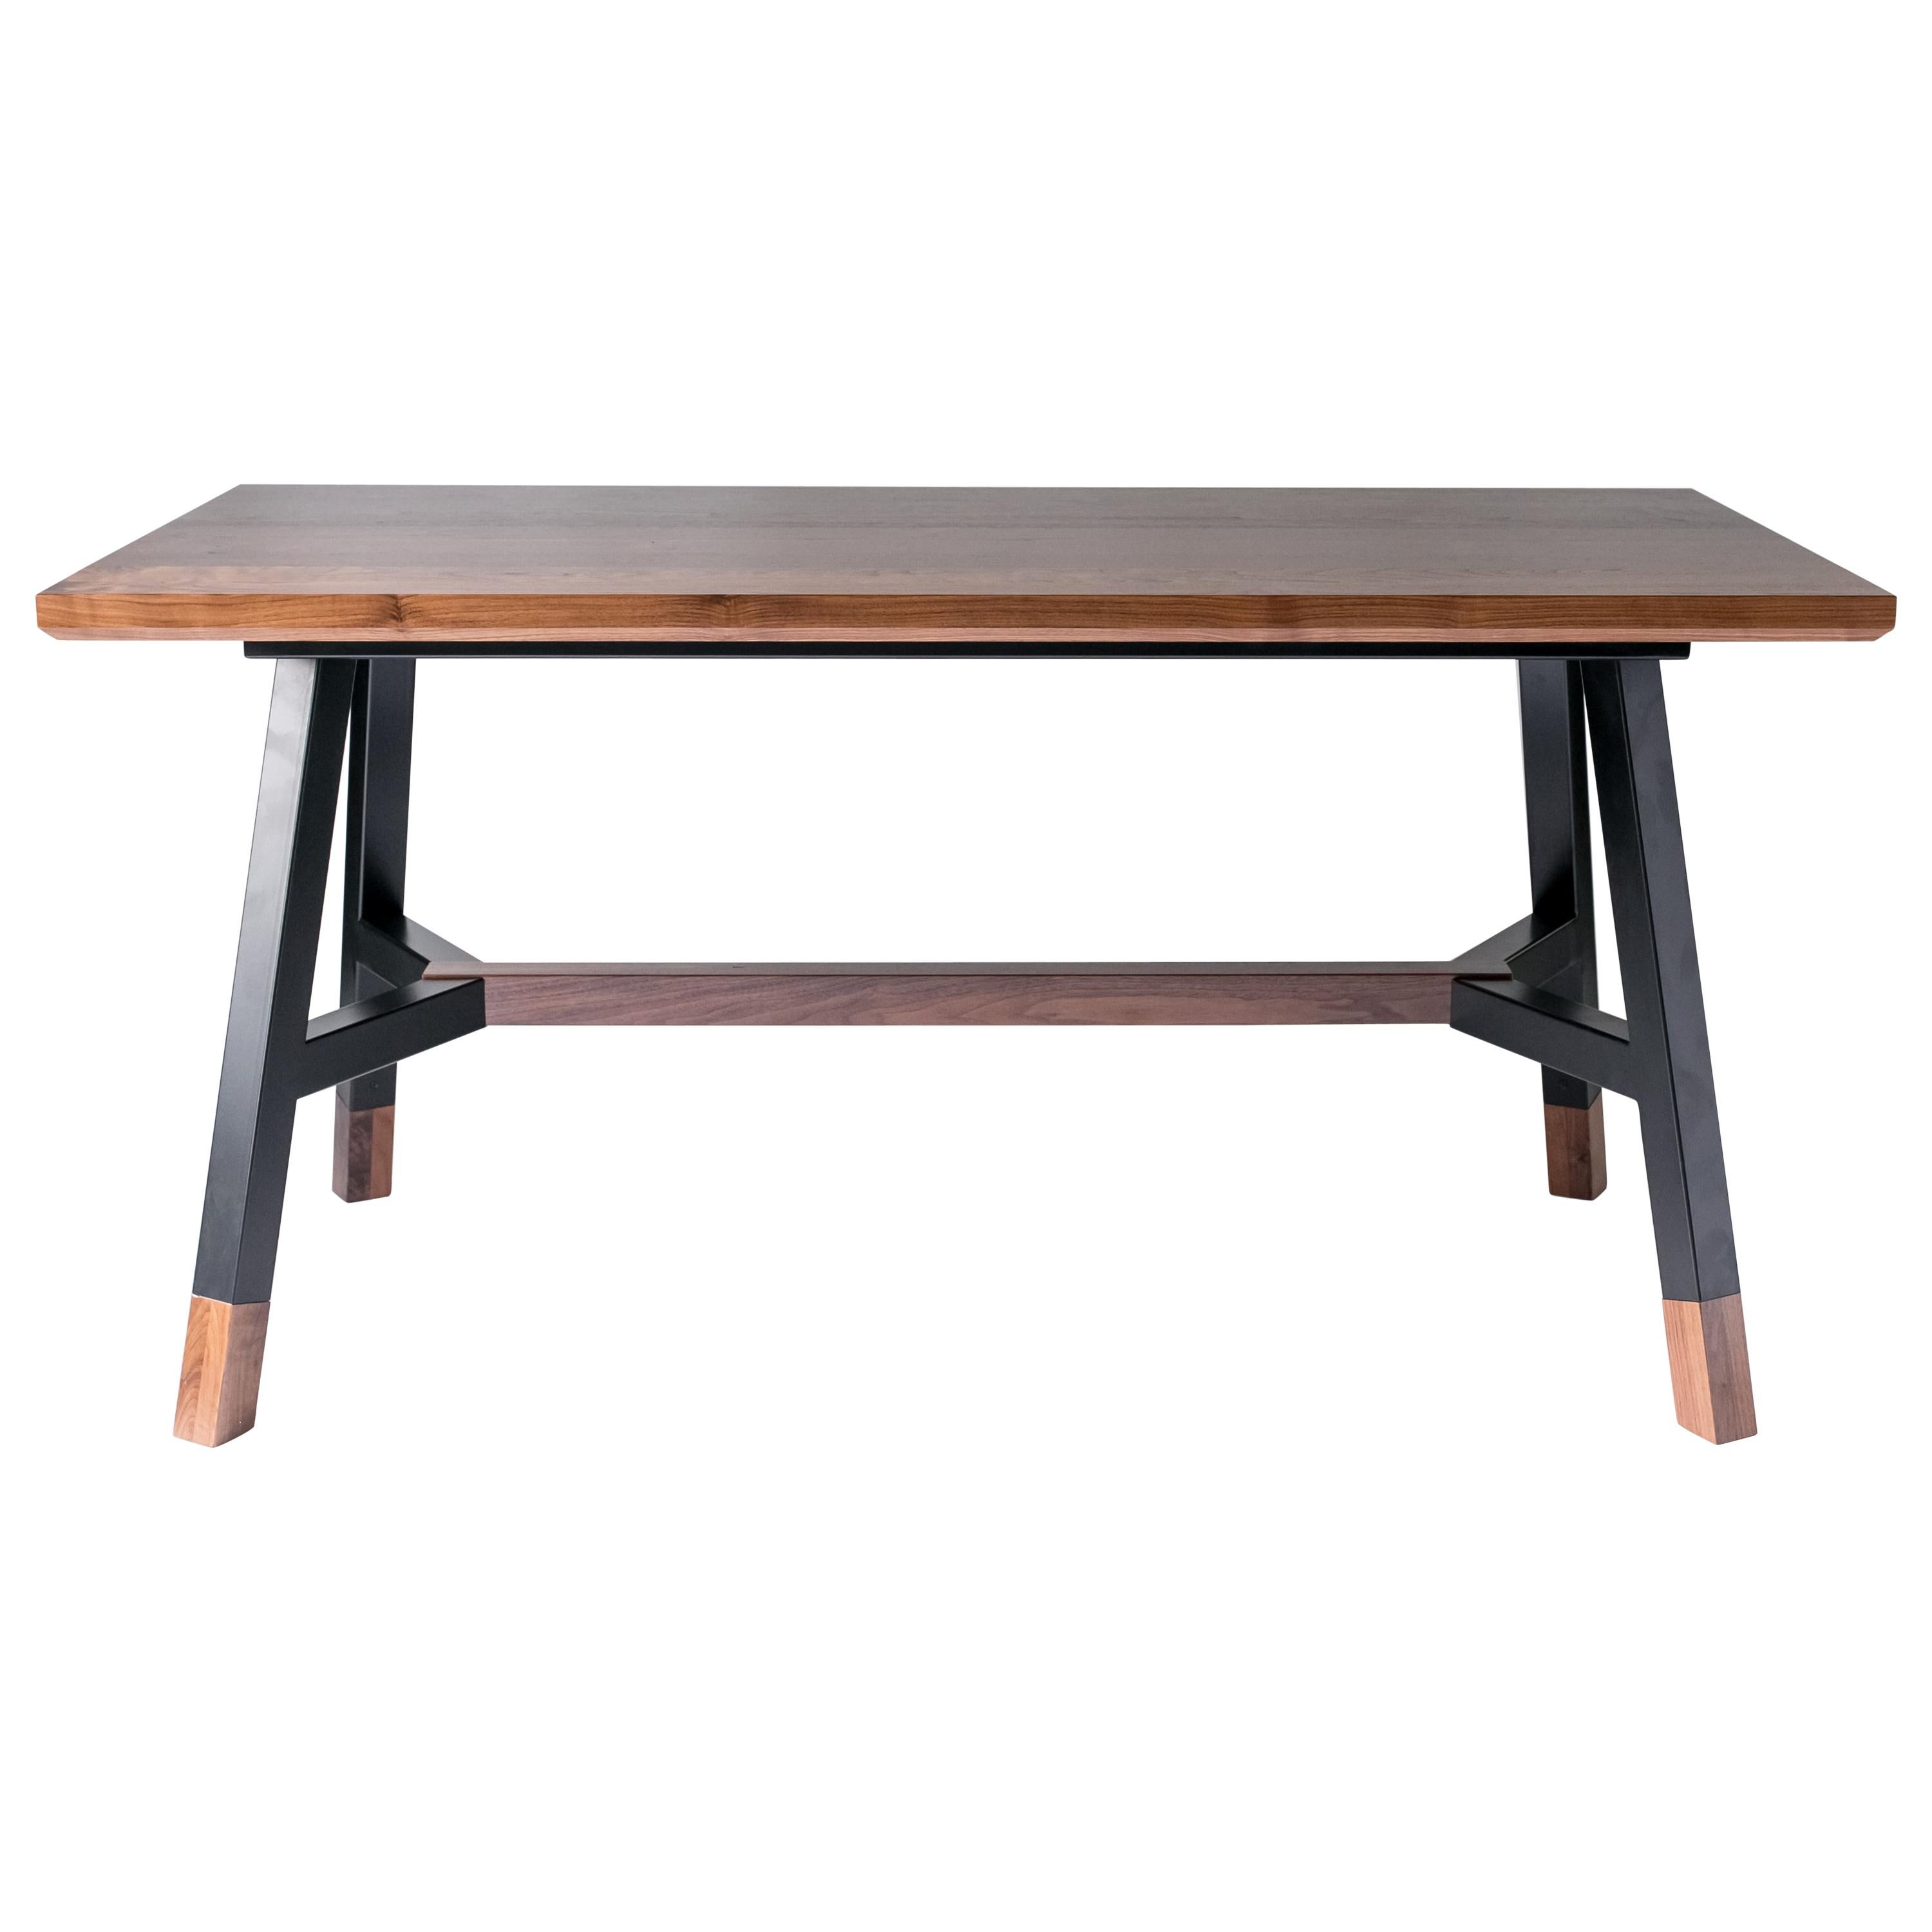 A-Frame, Modern Walnut and Black Powder Coated Steel Dining Table